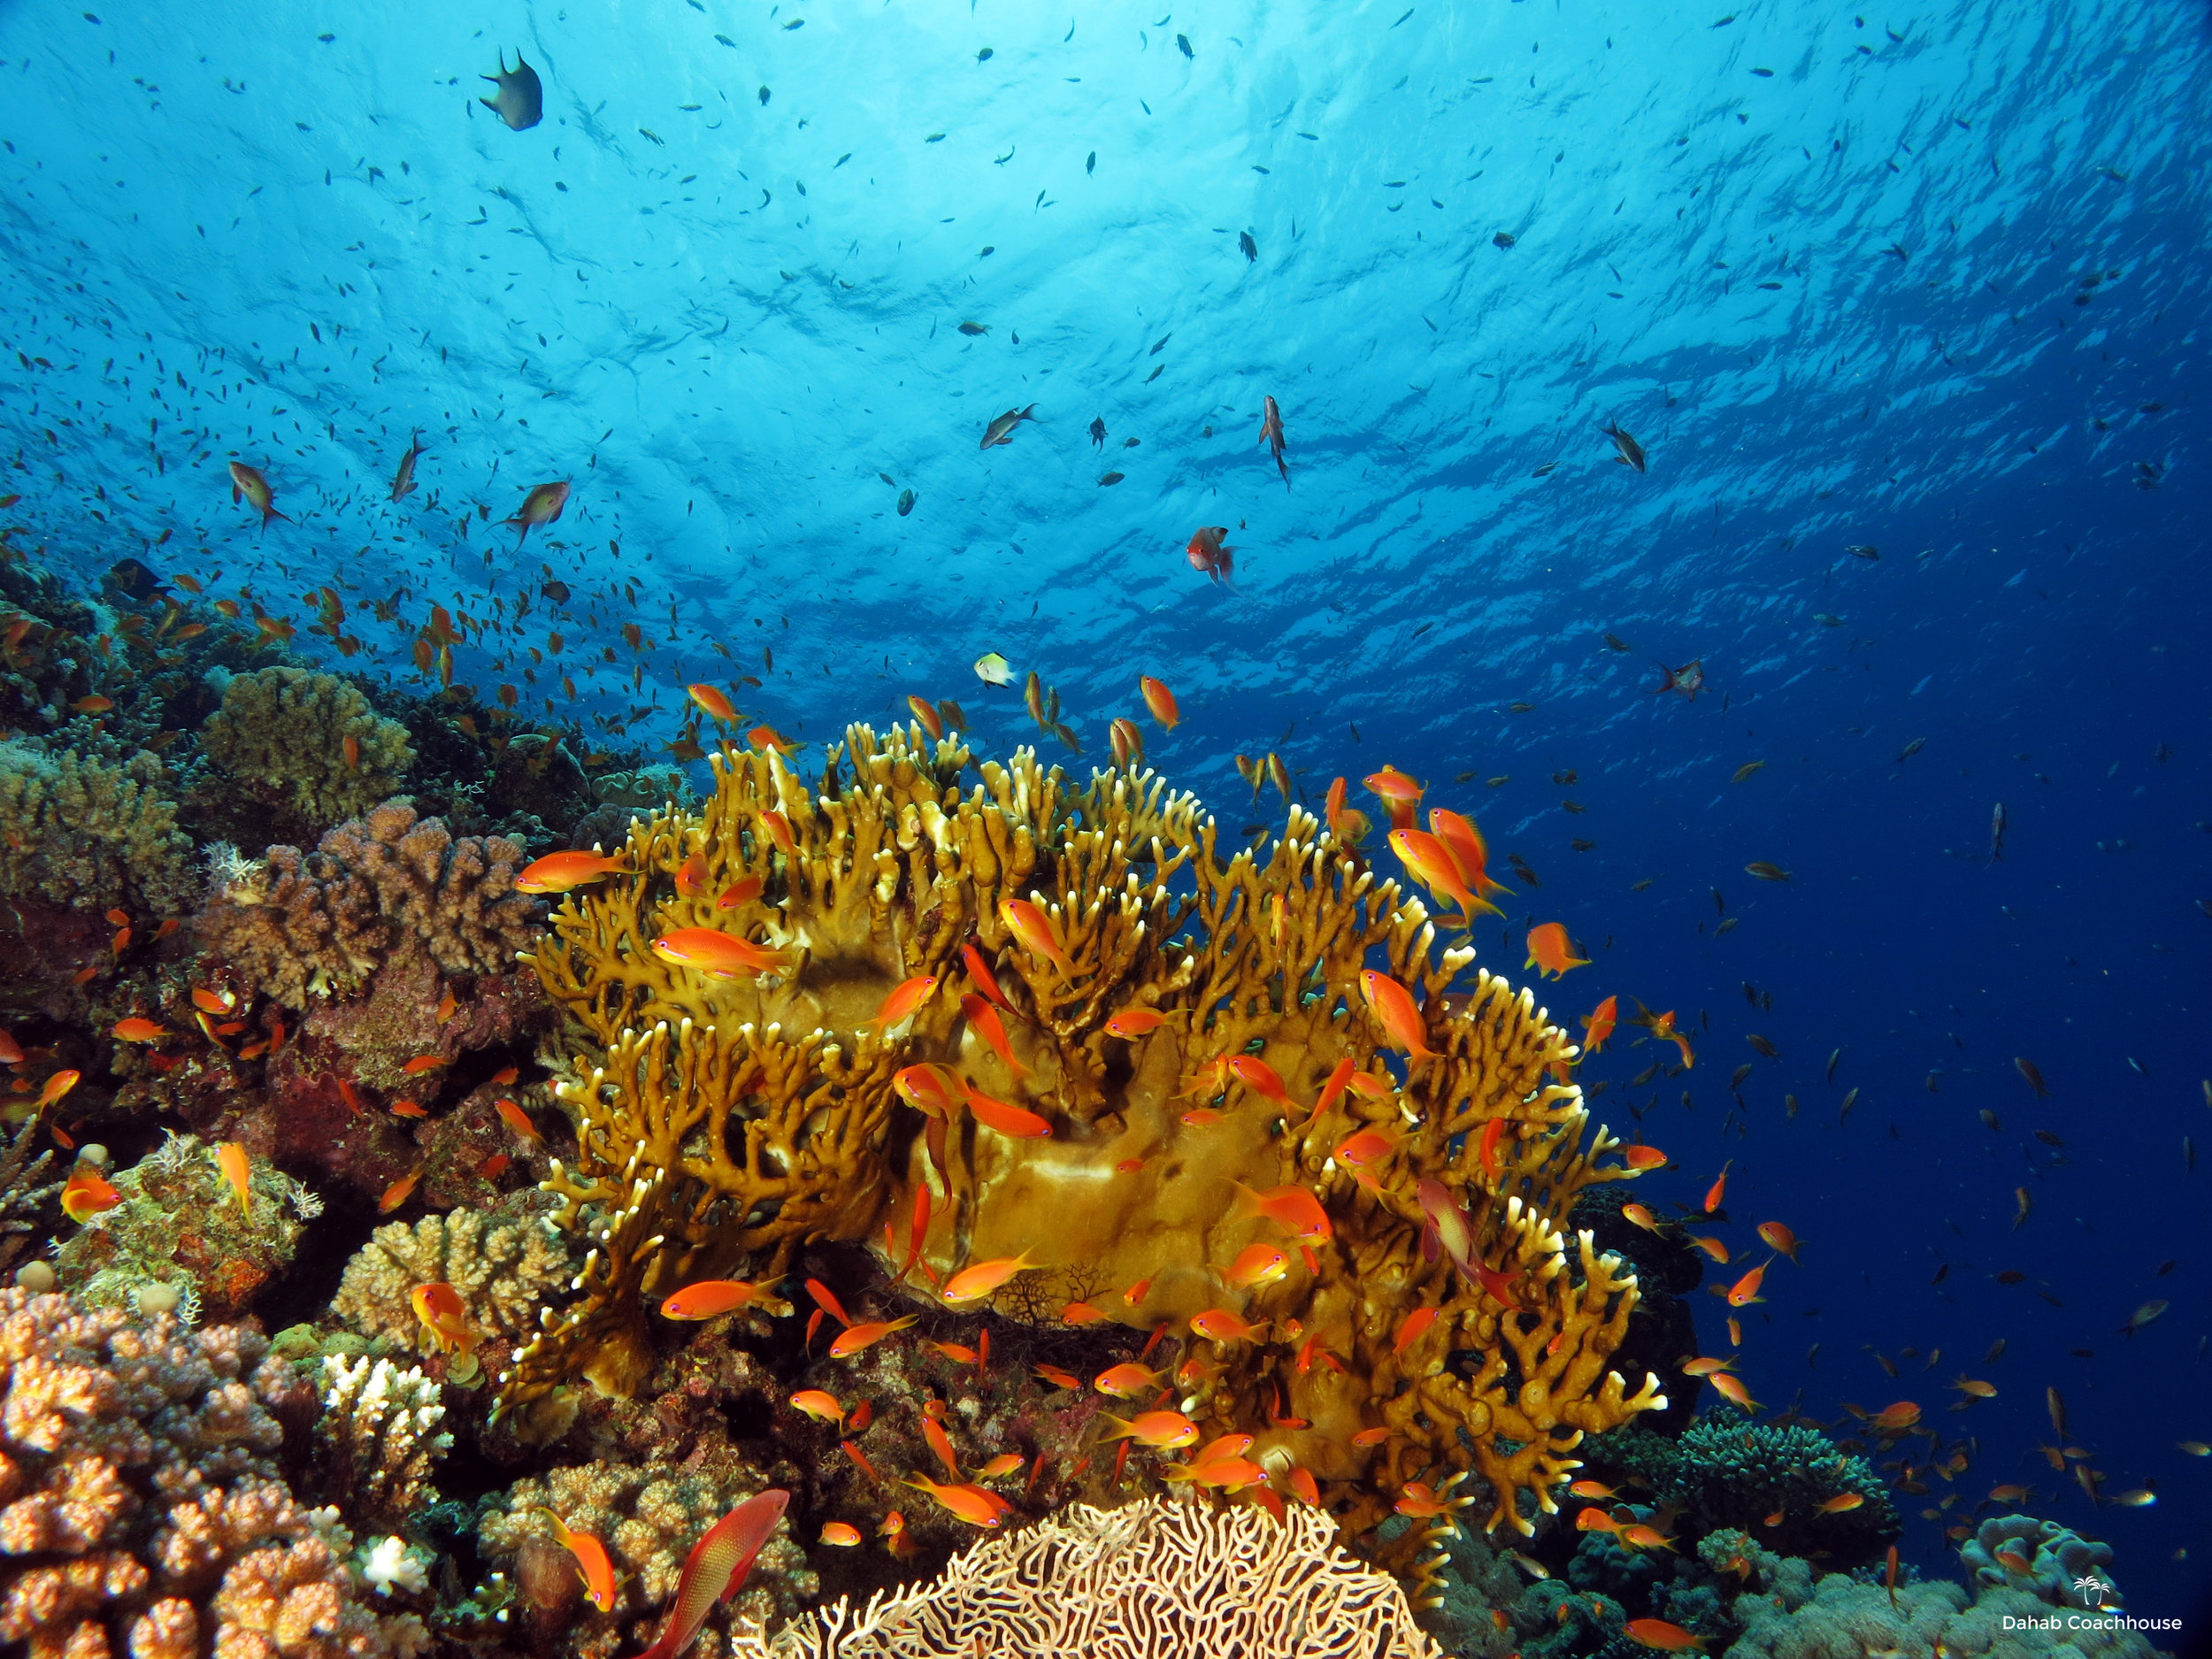 Dahab_Coachhouse_Egypt_Red_Sea_Diving_Beach_Accommodation_Holiday_Travel_Coral_reef.JPG